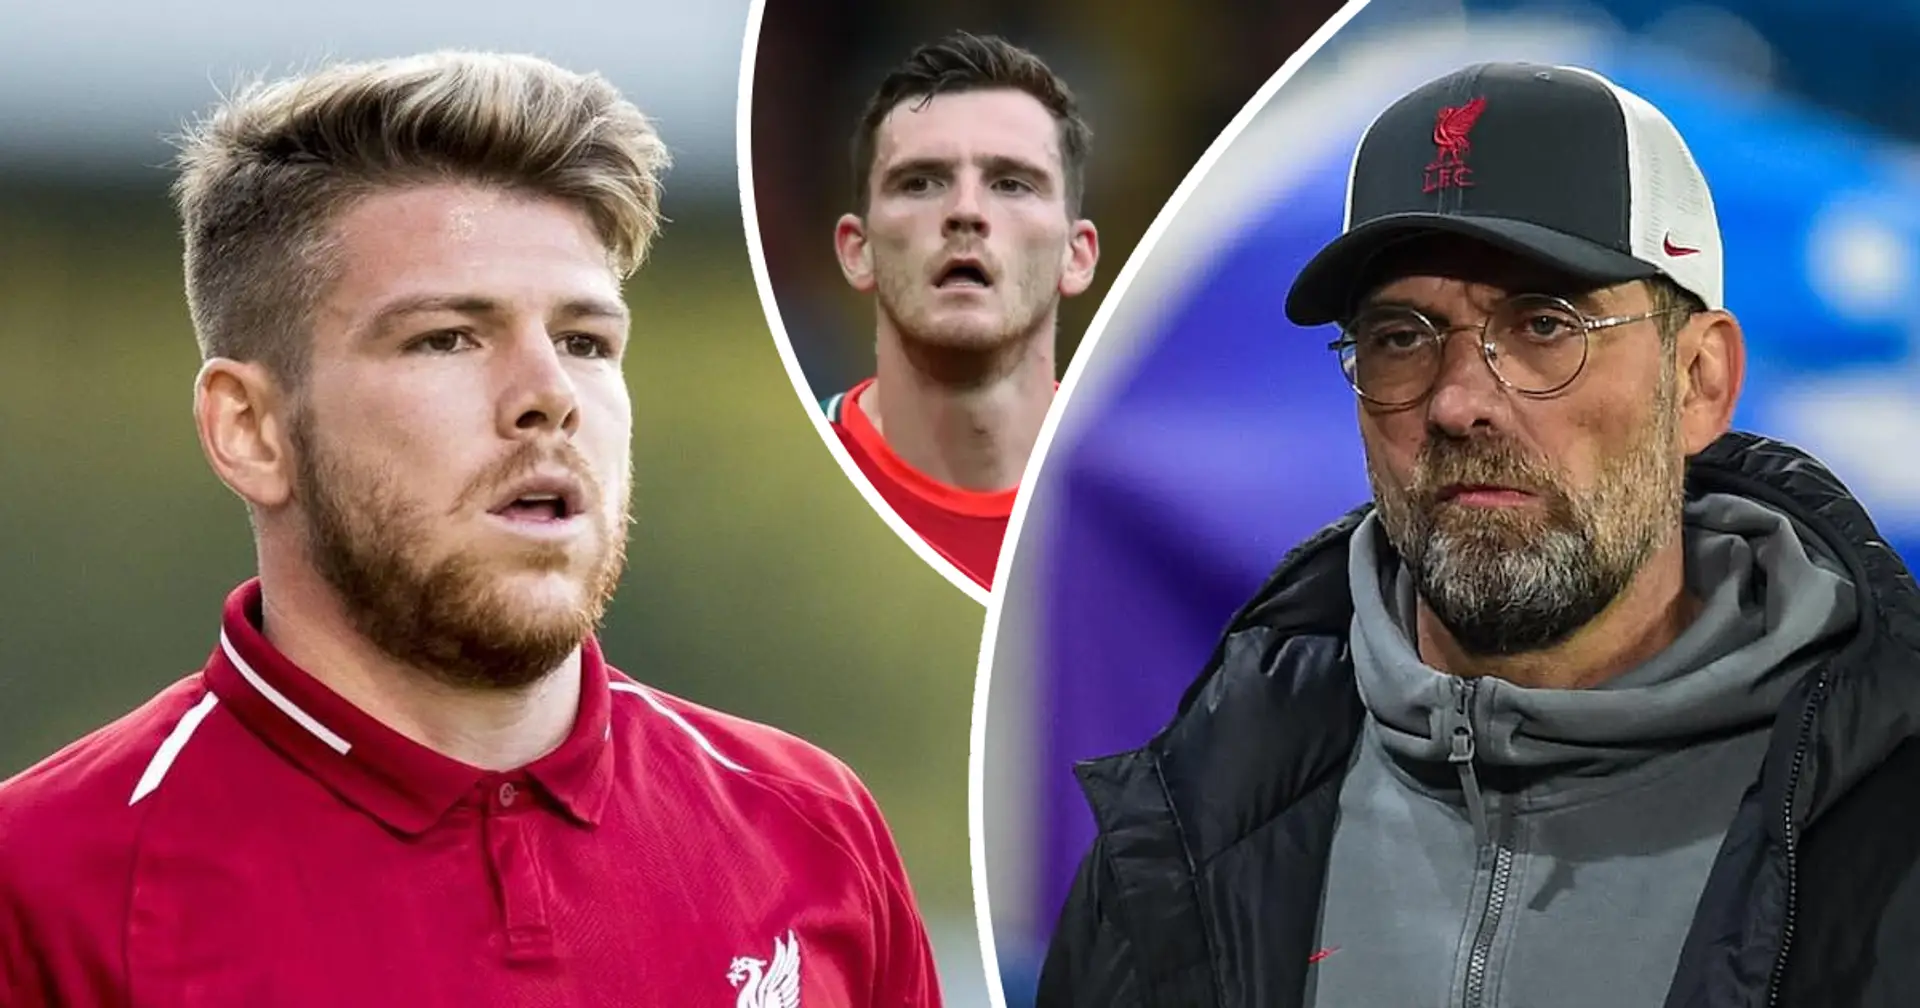 Alberto Moreno gives insight into Klopp's coaching style as he reveals how boss told him he's no longer starter